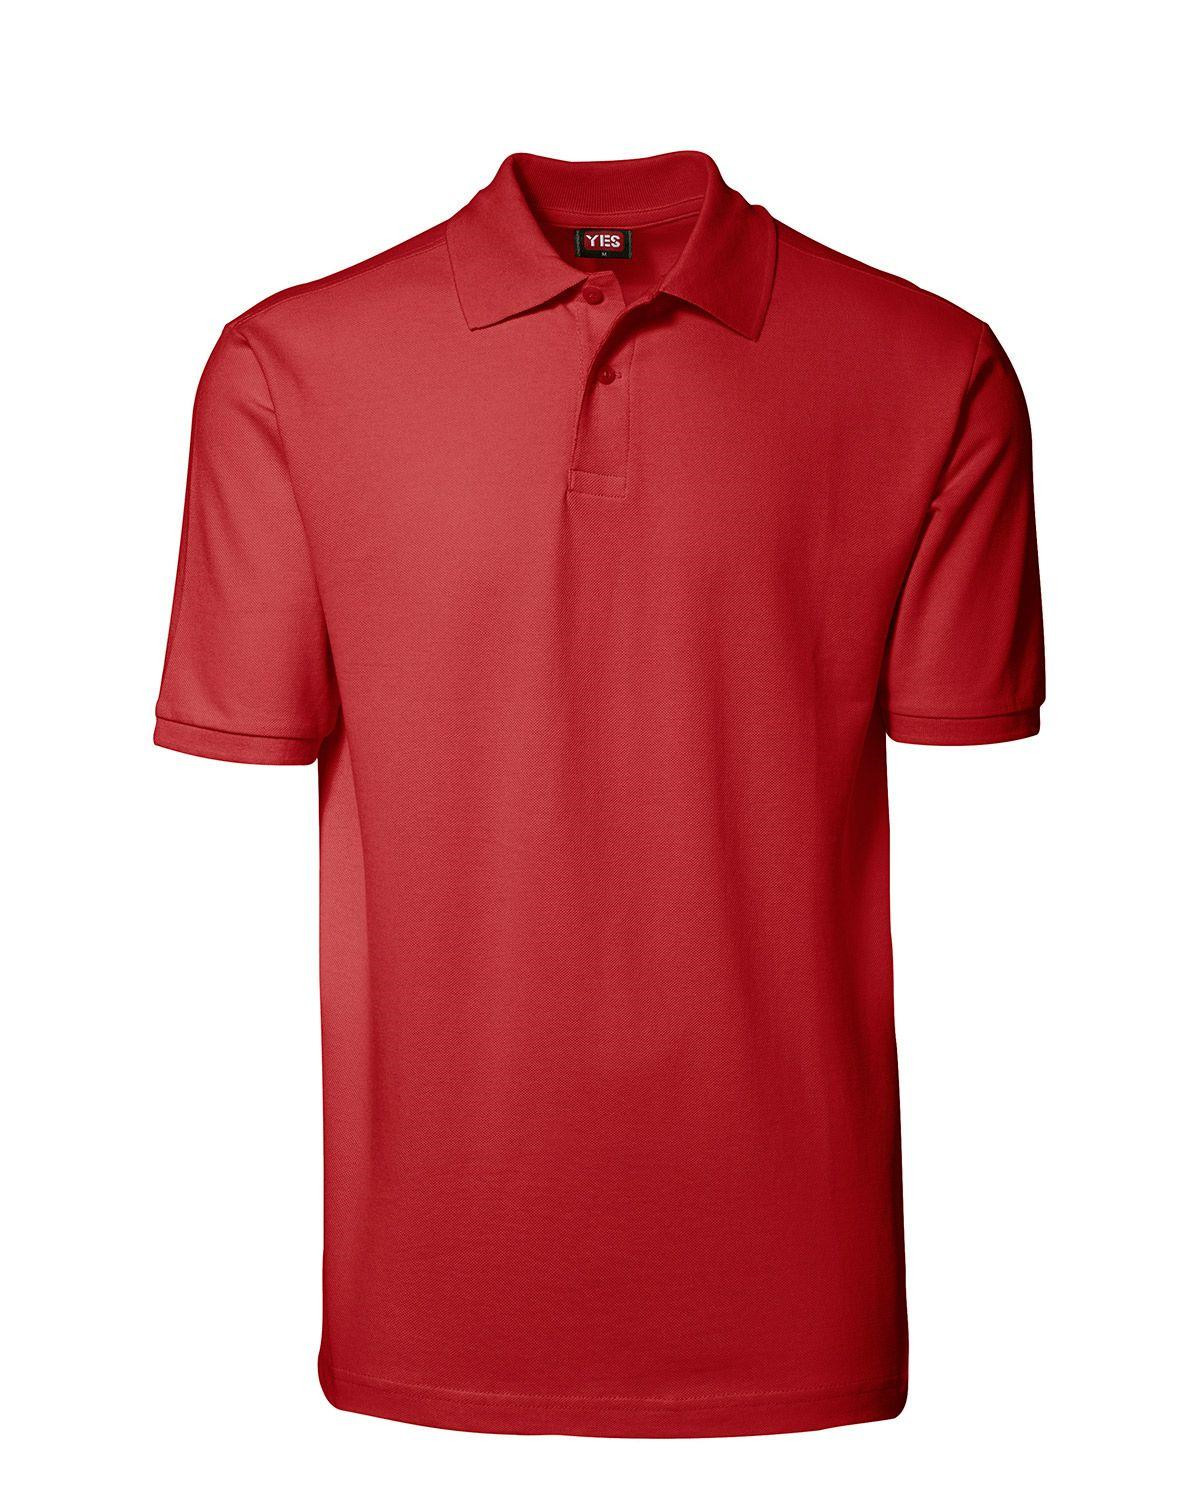 polo shirts yes or no